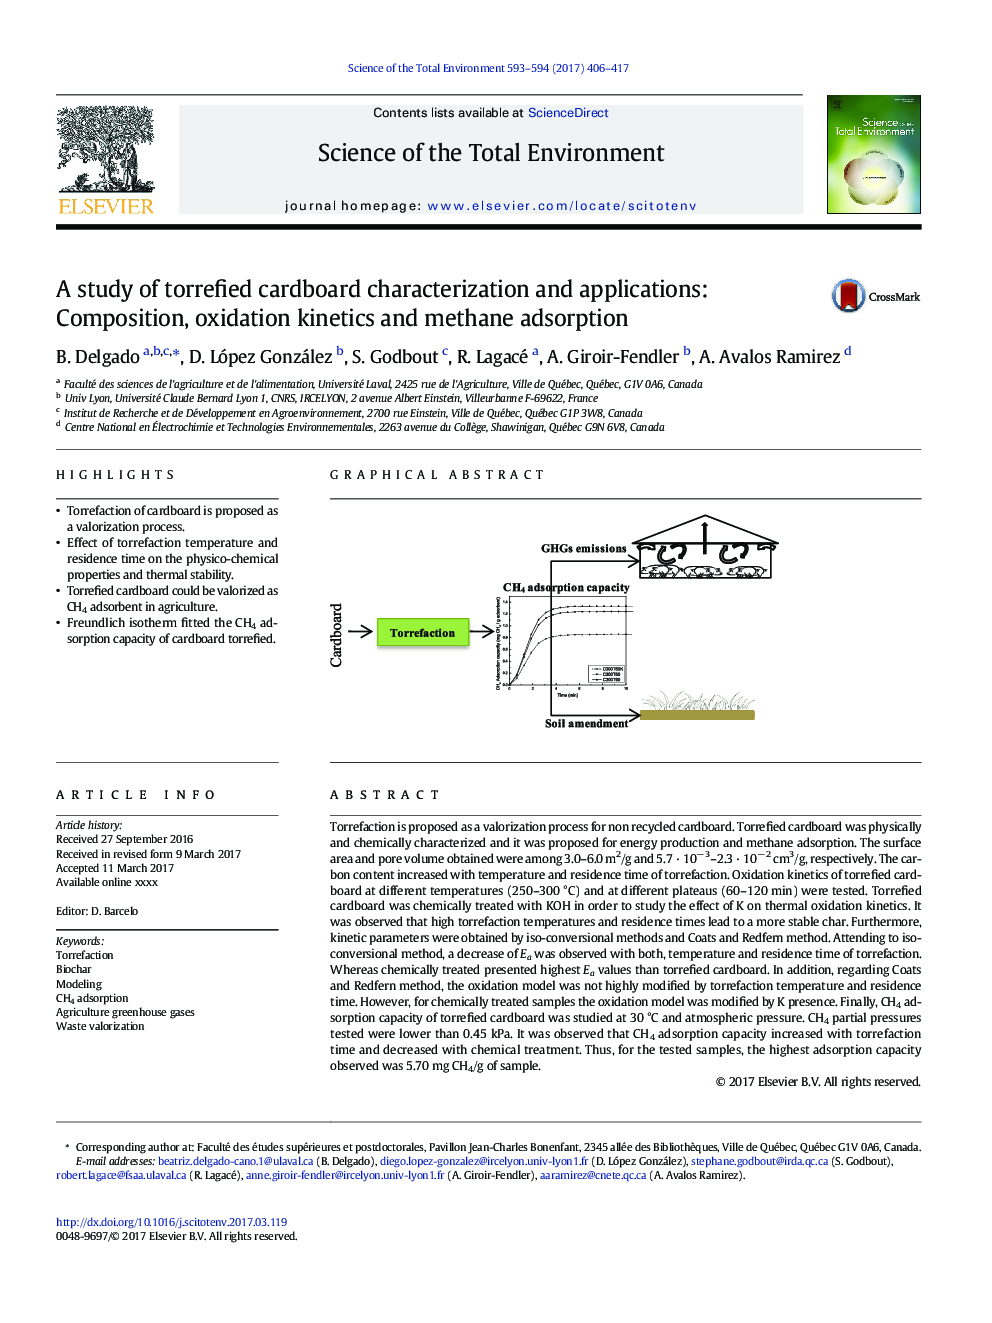 A study of torrefied cardboard characterization and applications: Composition, oxidation kinetics and methane adsorption